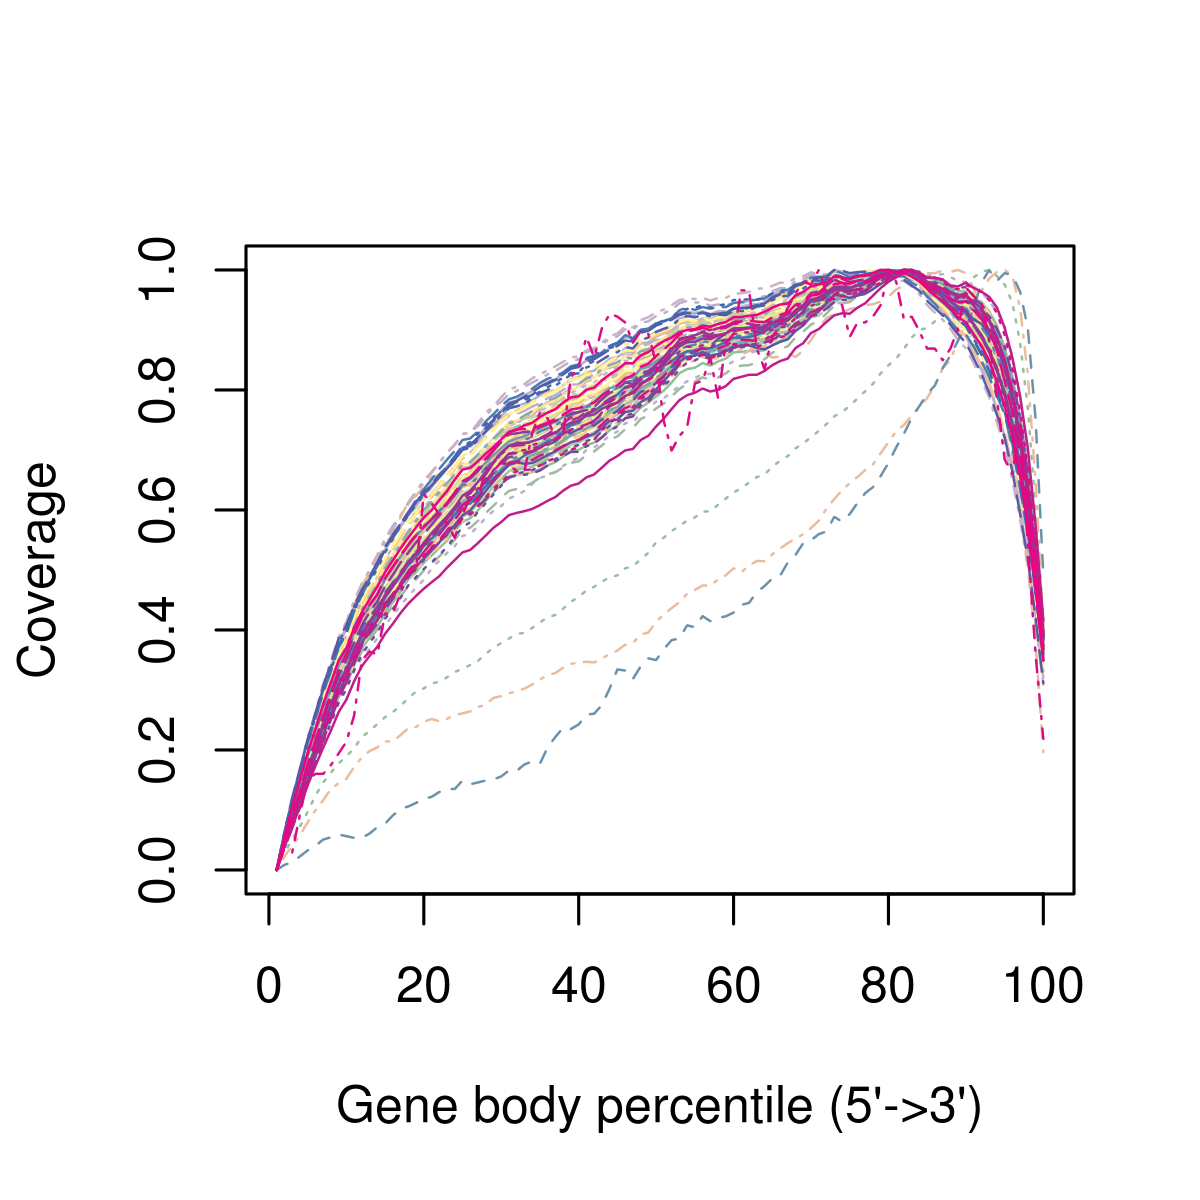 Example of 3' bias in the gene body coverage, after aligning the sequencing reads to the transcriptome. Each line represents the average coverage across all the genes in a cell. In this example, in addition to the 3' bias across all cells, there are three cells that look like outliers relative to the rest and should be removed from downstream analysis. These may be cells where RNA quality was poorer, e.g. due to degradation.